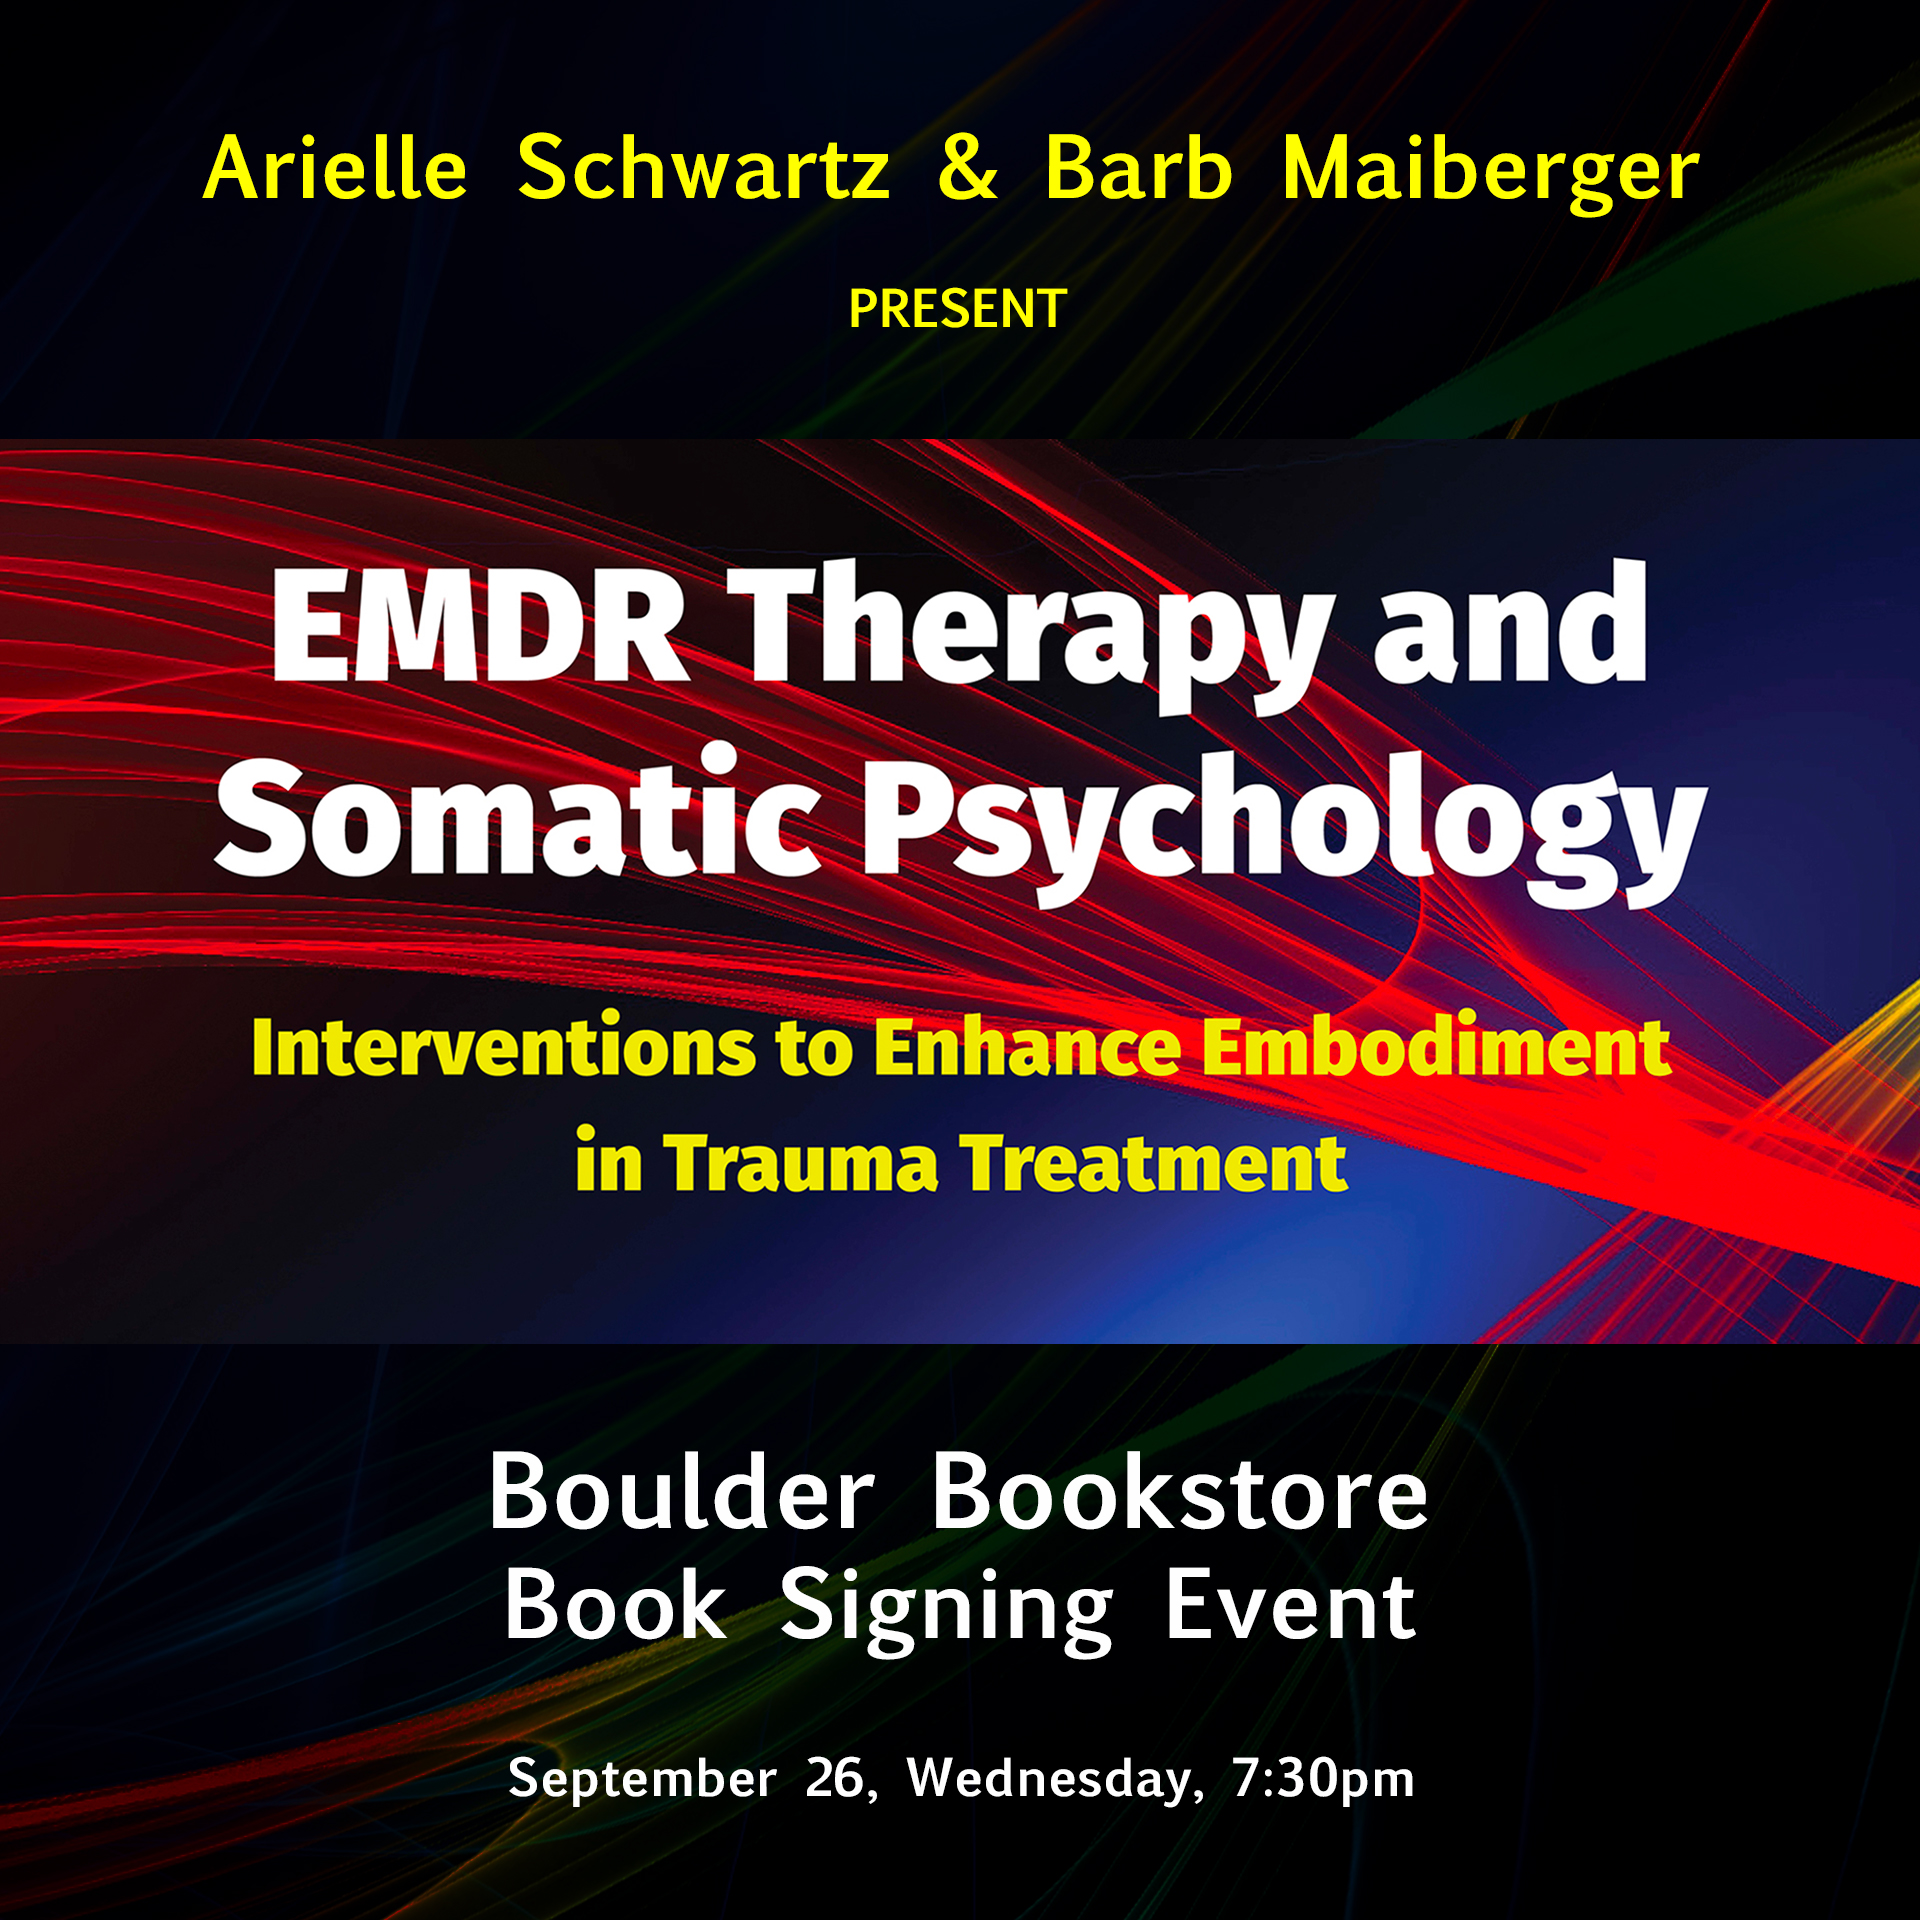 Boulder Bookstore Book Signing Event -- Arielle Schwartz and Barb Maiberger Present "EMDR Therapy and Somatic Psychology: Interventions to Enhance Embodiment in Trauma Treatment" -- -September 26th, Wednesday at 7:30pm